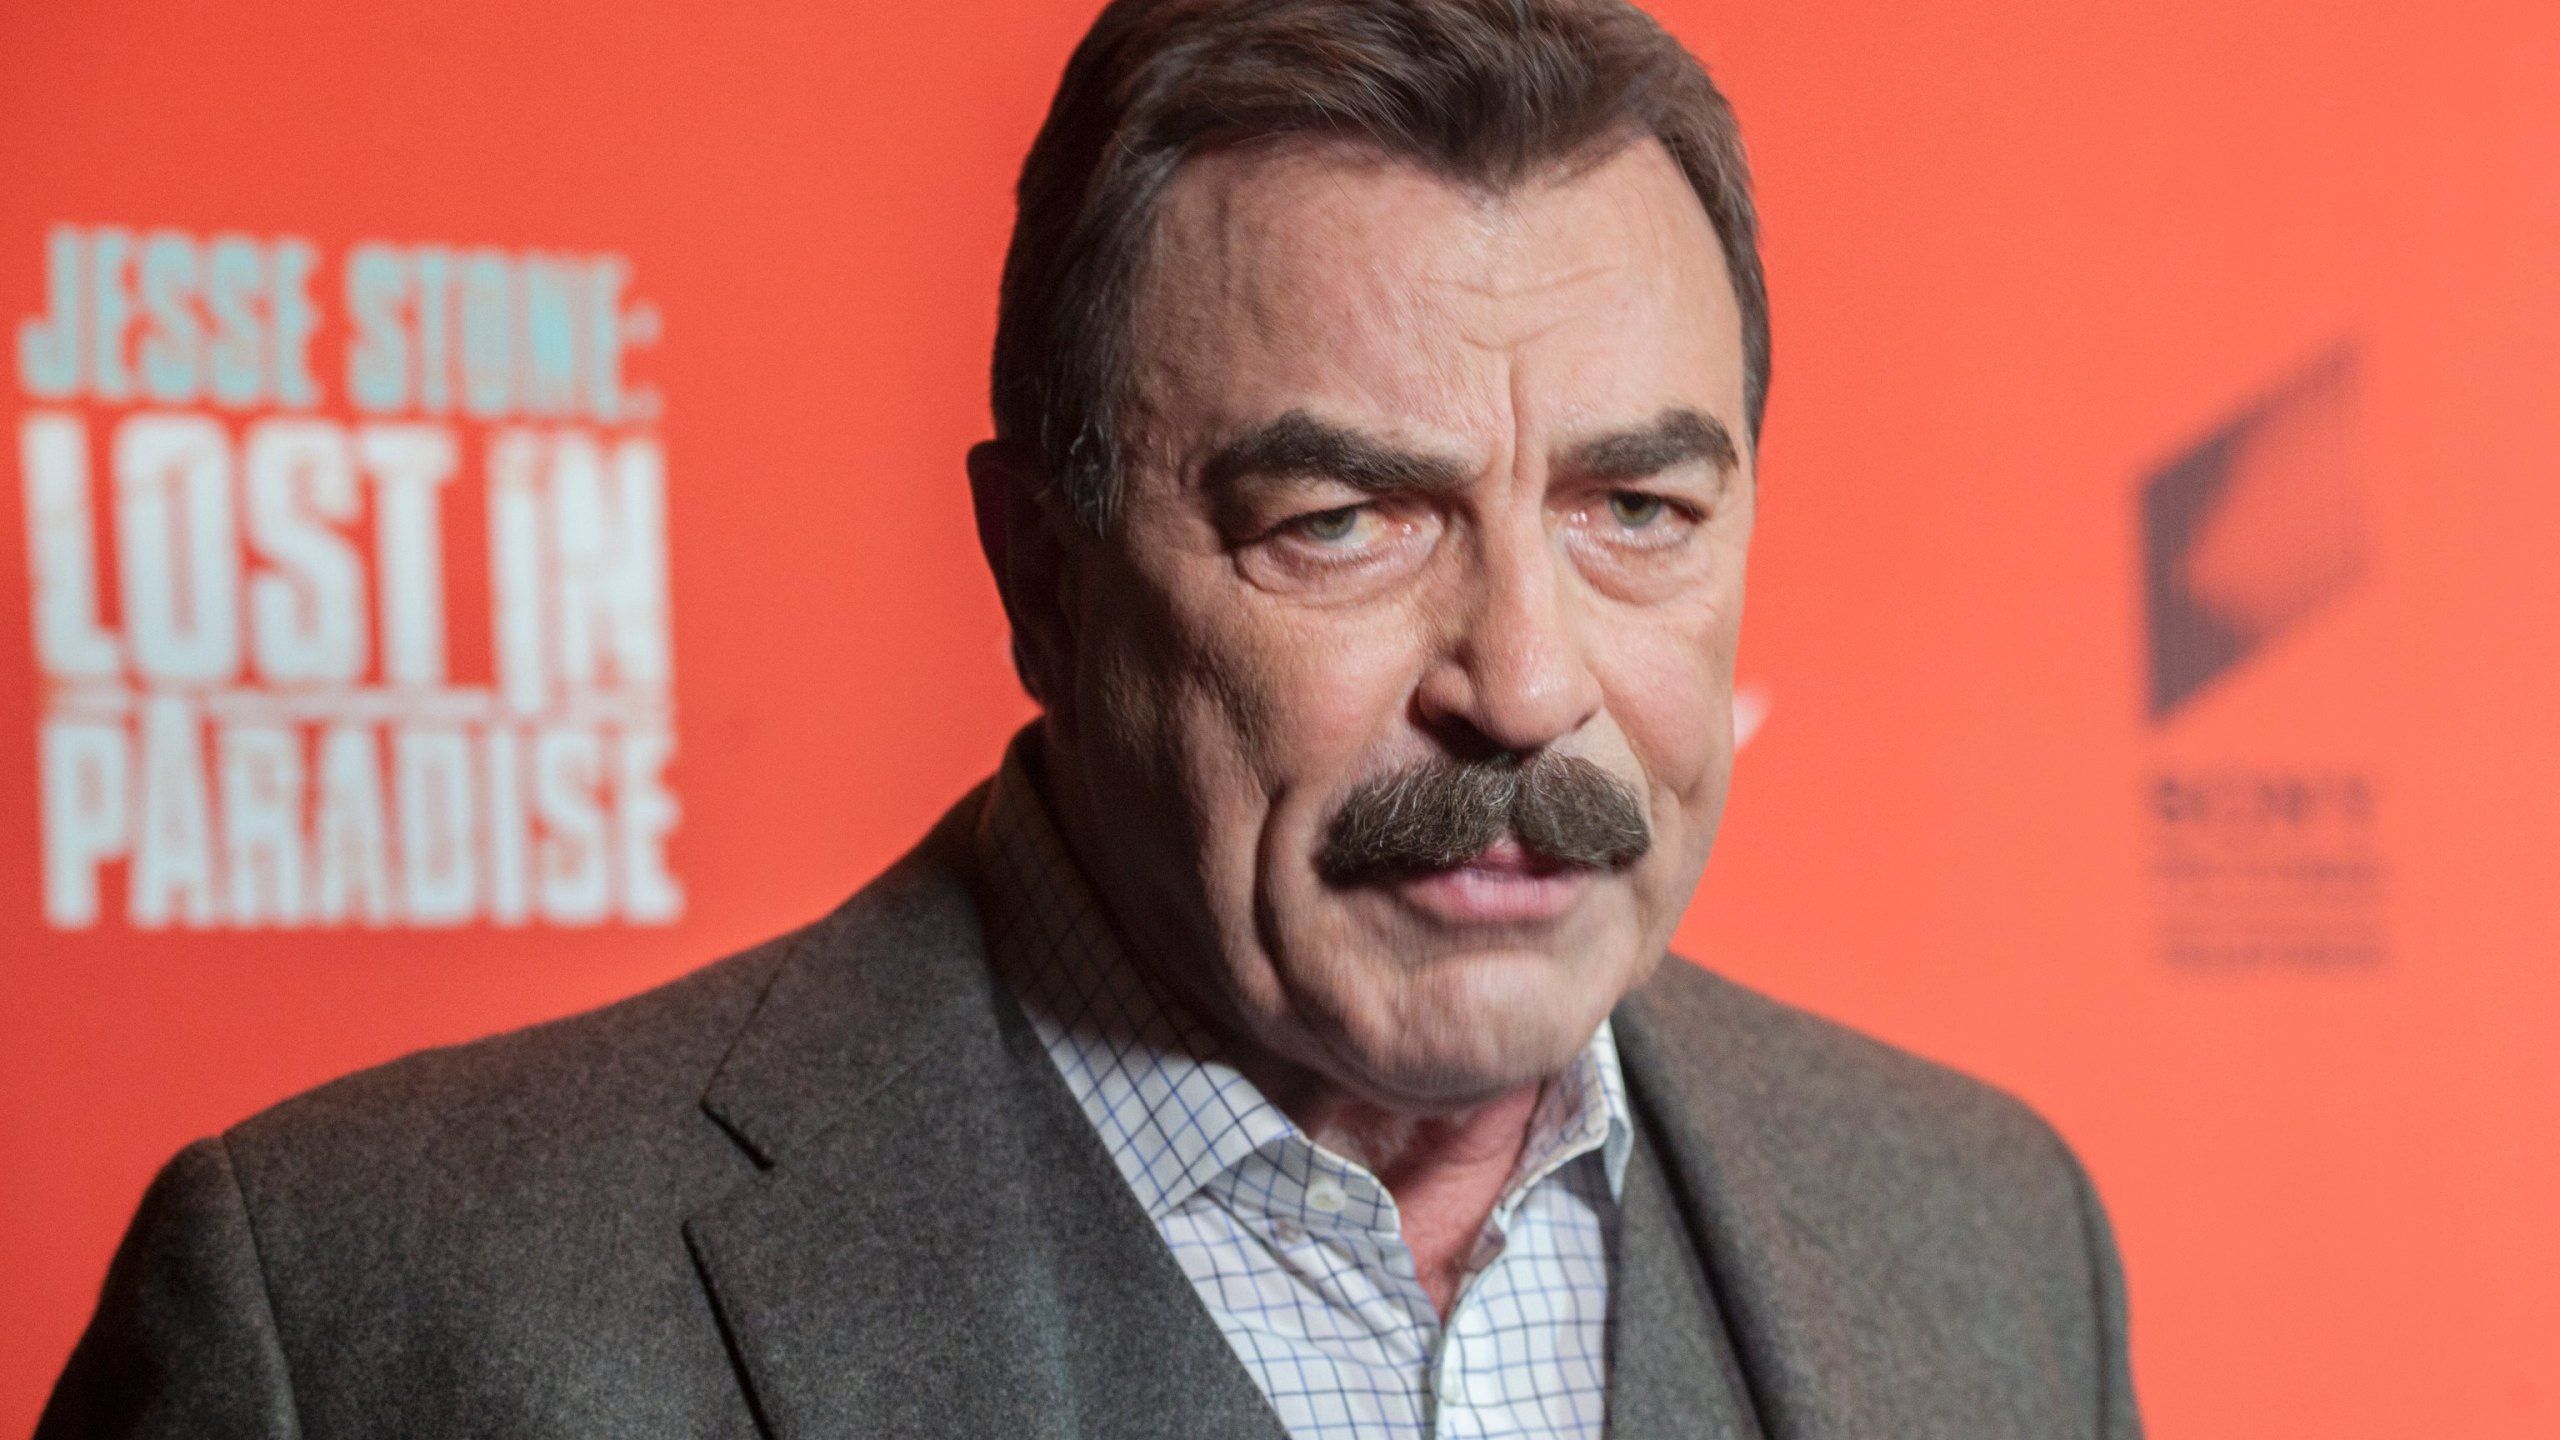 Tom Selleck gives a rare interview on fame, family and why he quit 'Magnum P.I.'